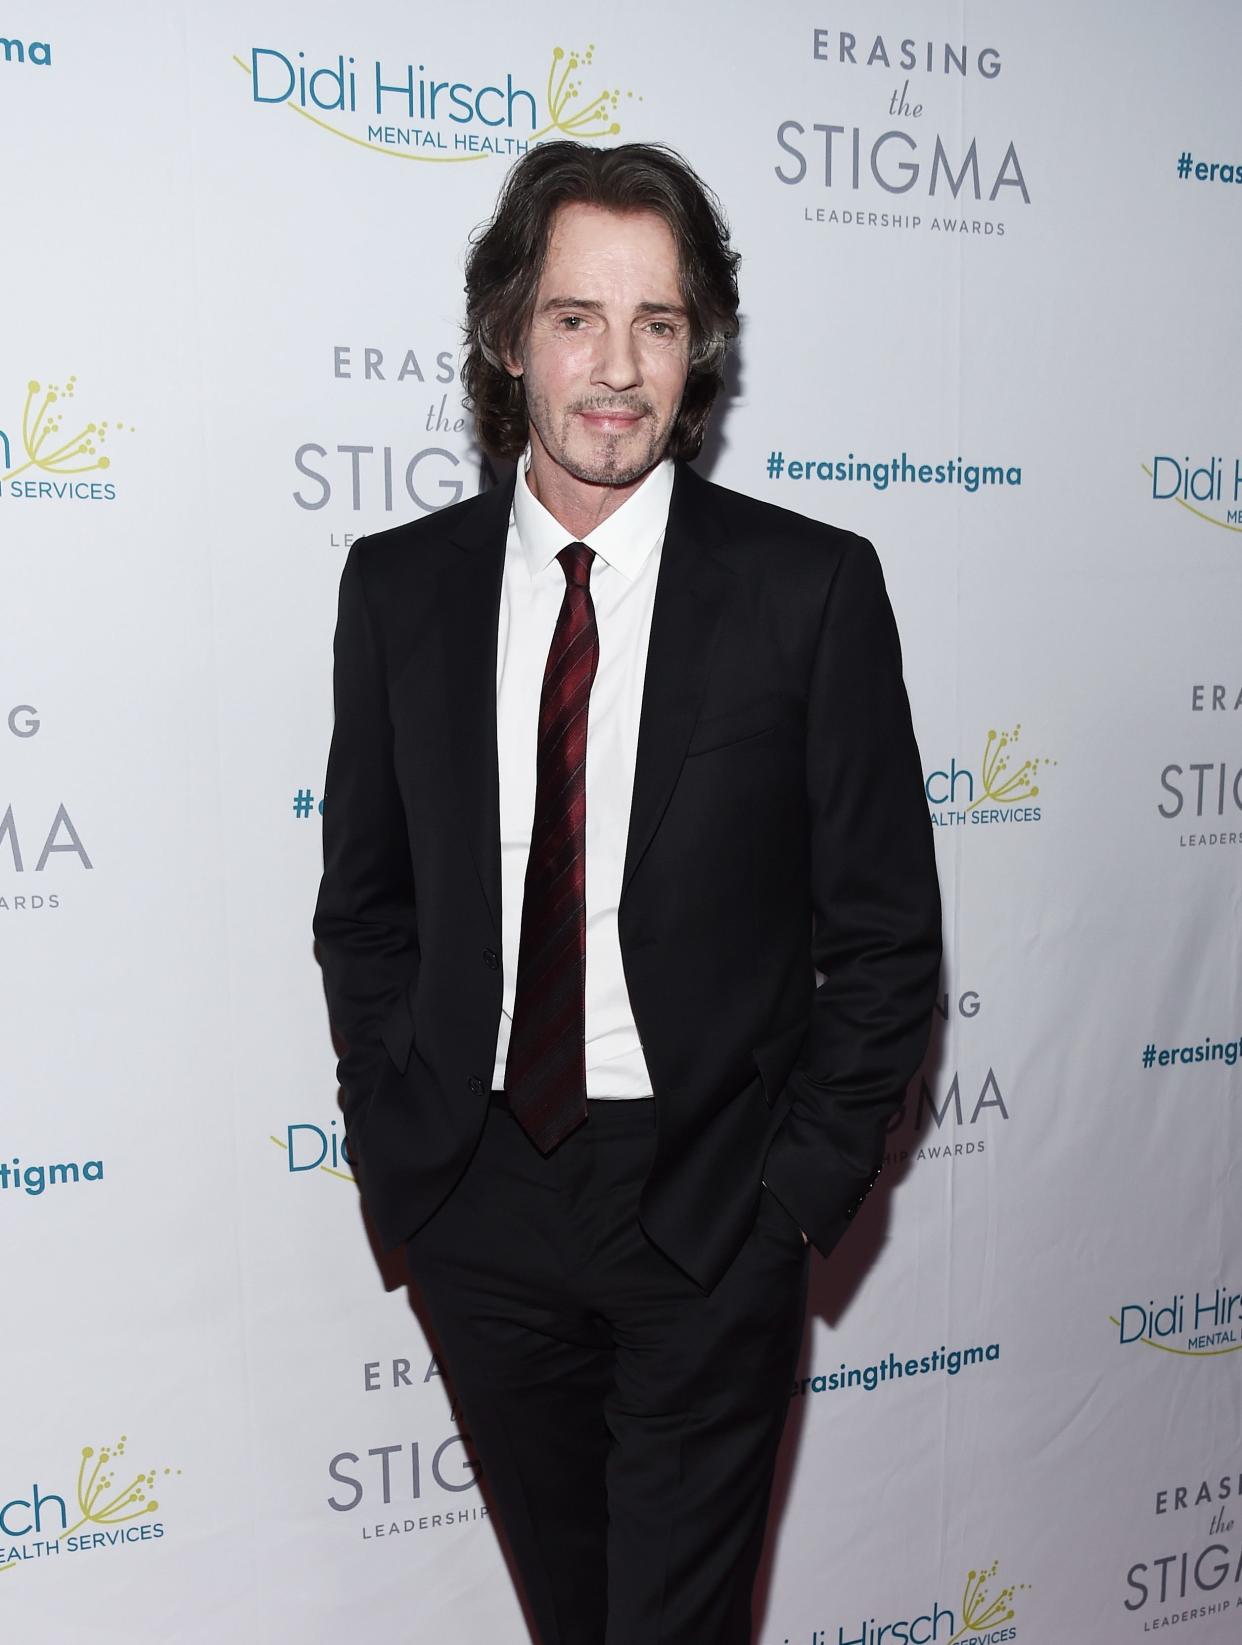 BEVERLY HILLS, CA - APRIL 26:  Musician and actor Rick Springfield arrives at the Didi Hirsch Mental Health Services' 2018 Erasing The Stigma Leadership Awards at The Beverly Hilton Hotel on April 26, 2018 in Beverly Hills, California.  (Photo by Amanda Edwards/Getty Images)